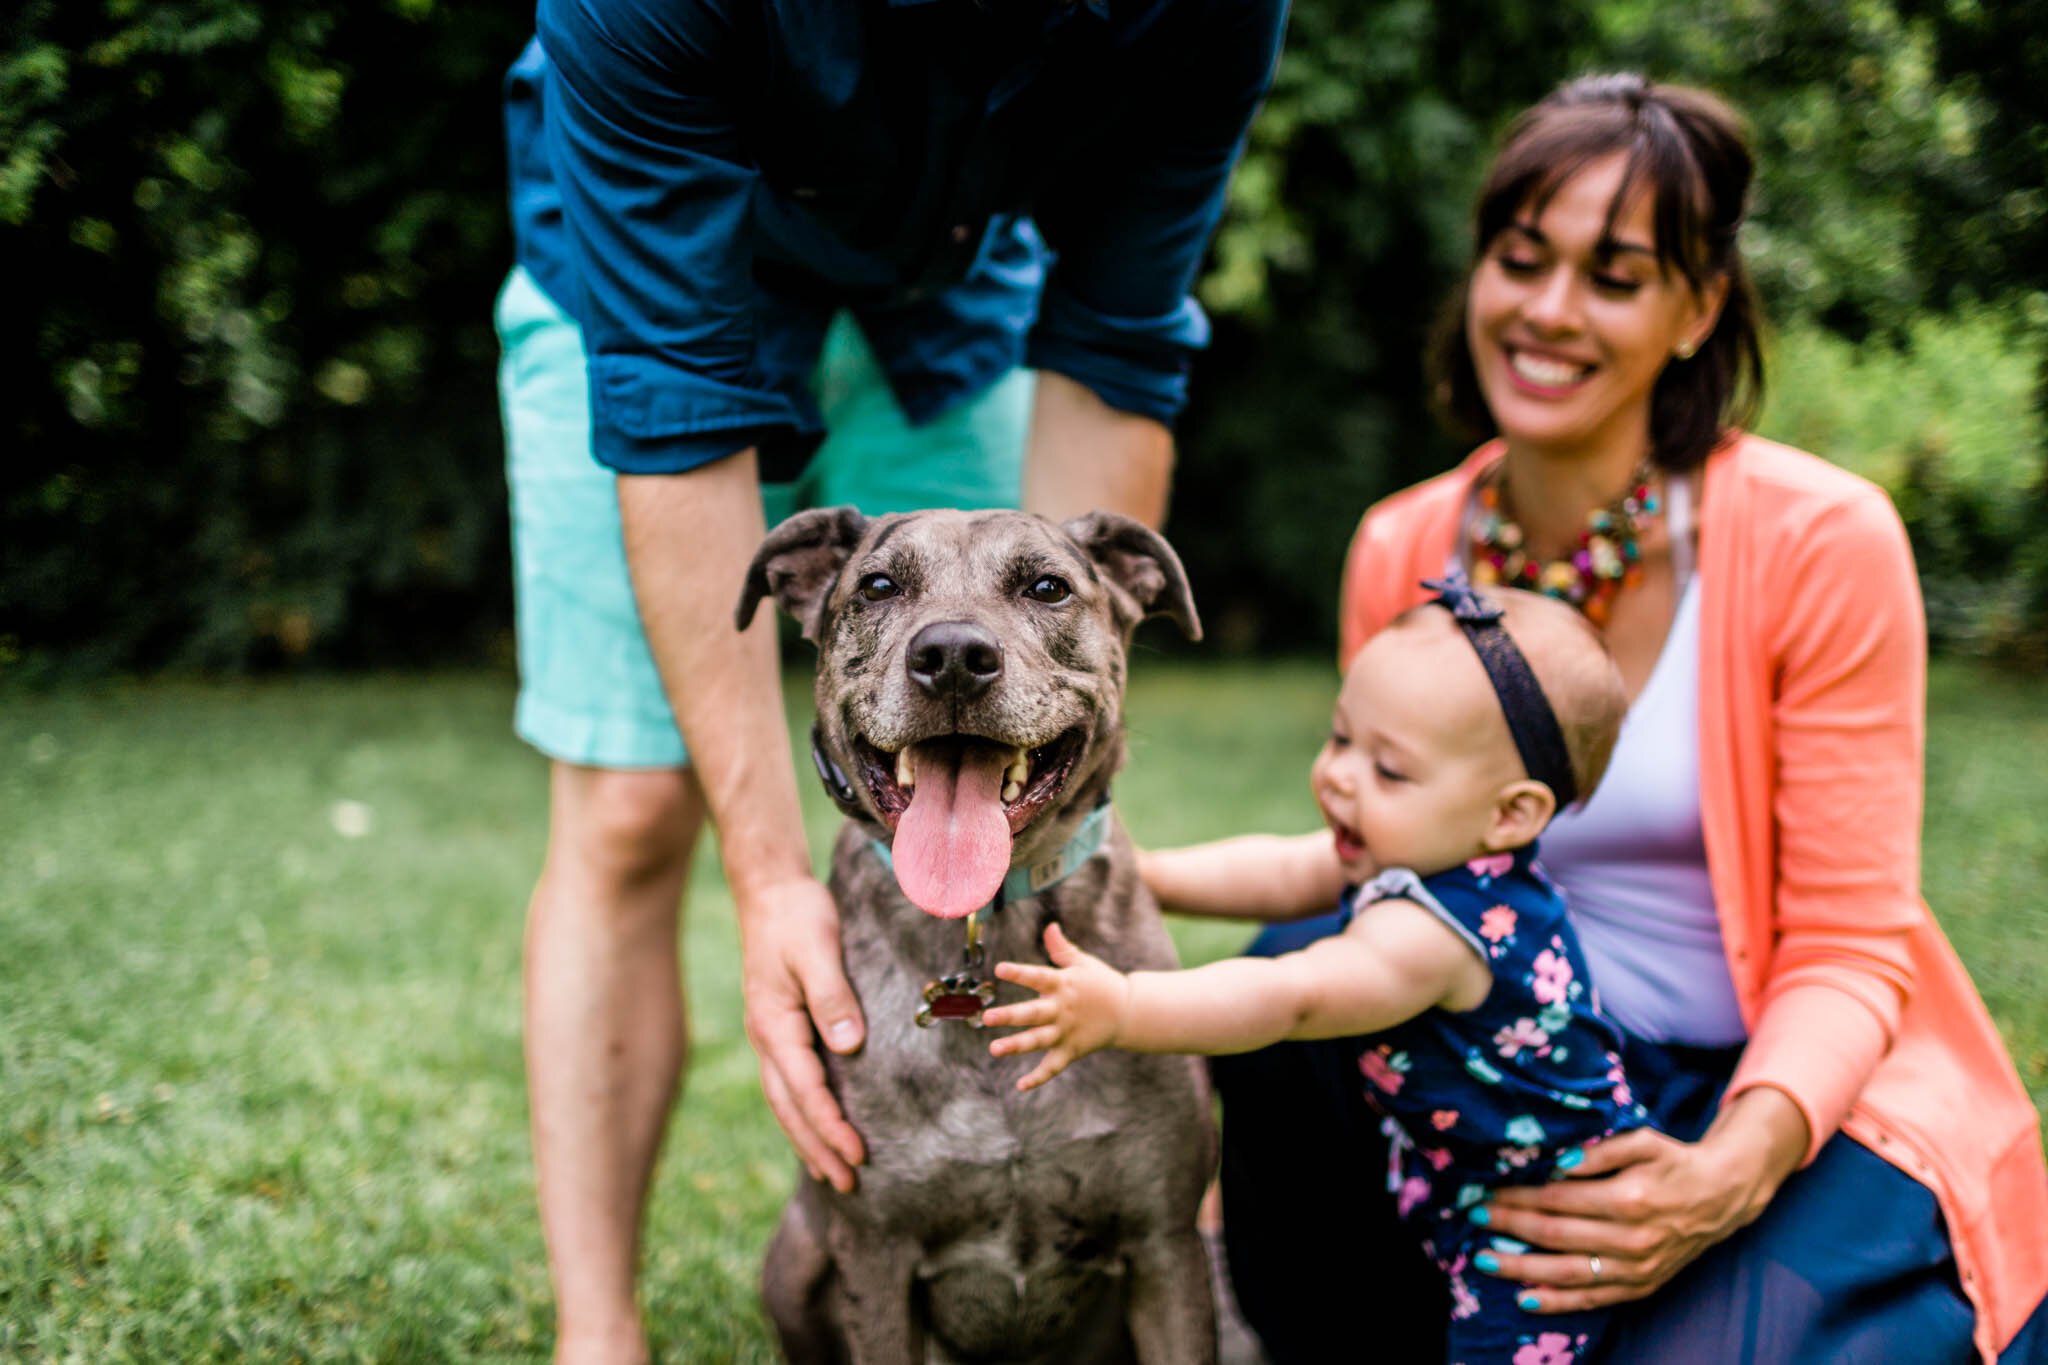 Raleigh Family Photographer | By G. Lin Photography | Dog smiling at camera while baby girl petting dog